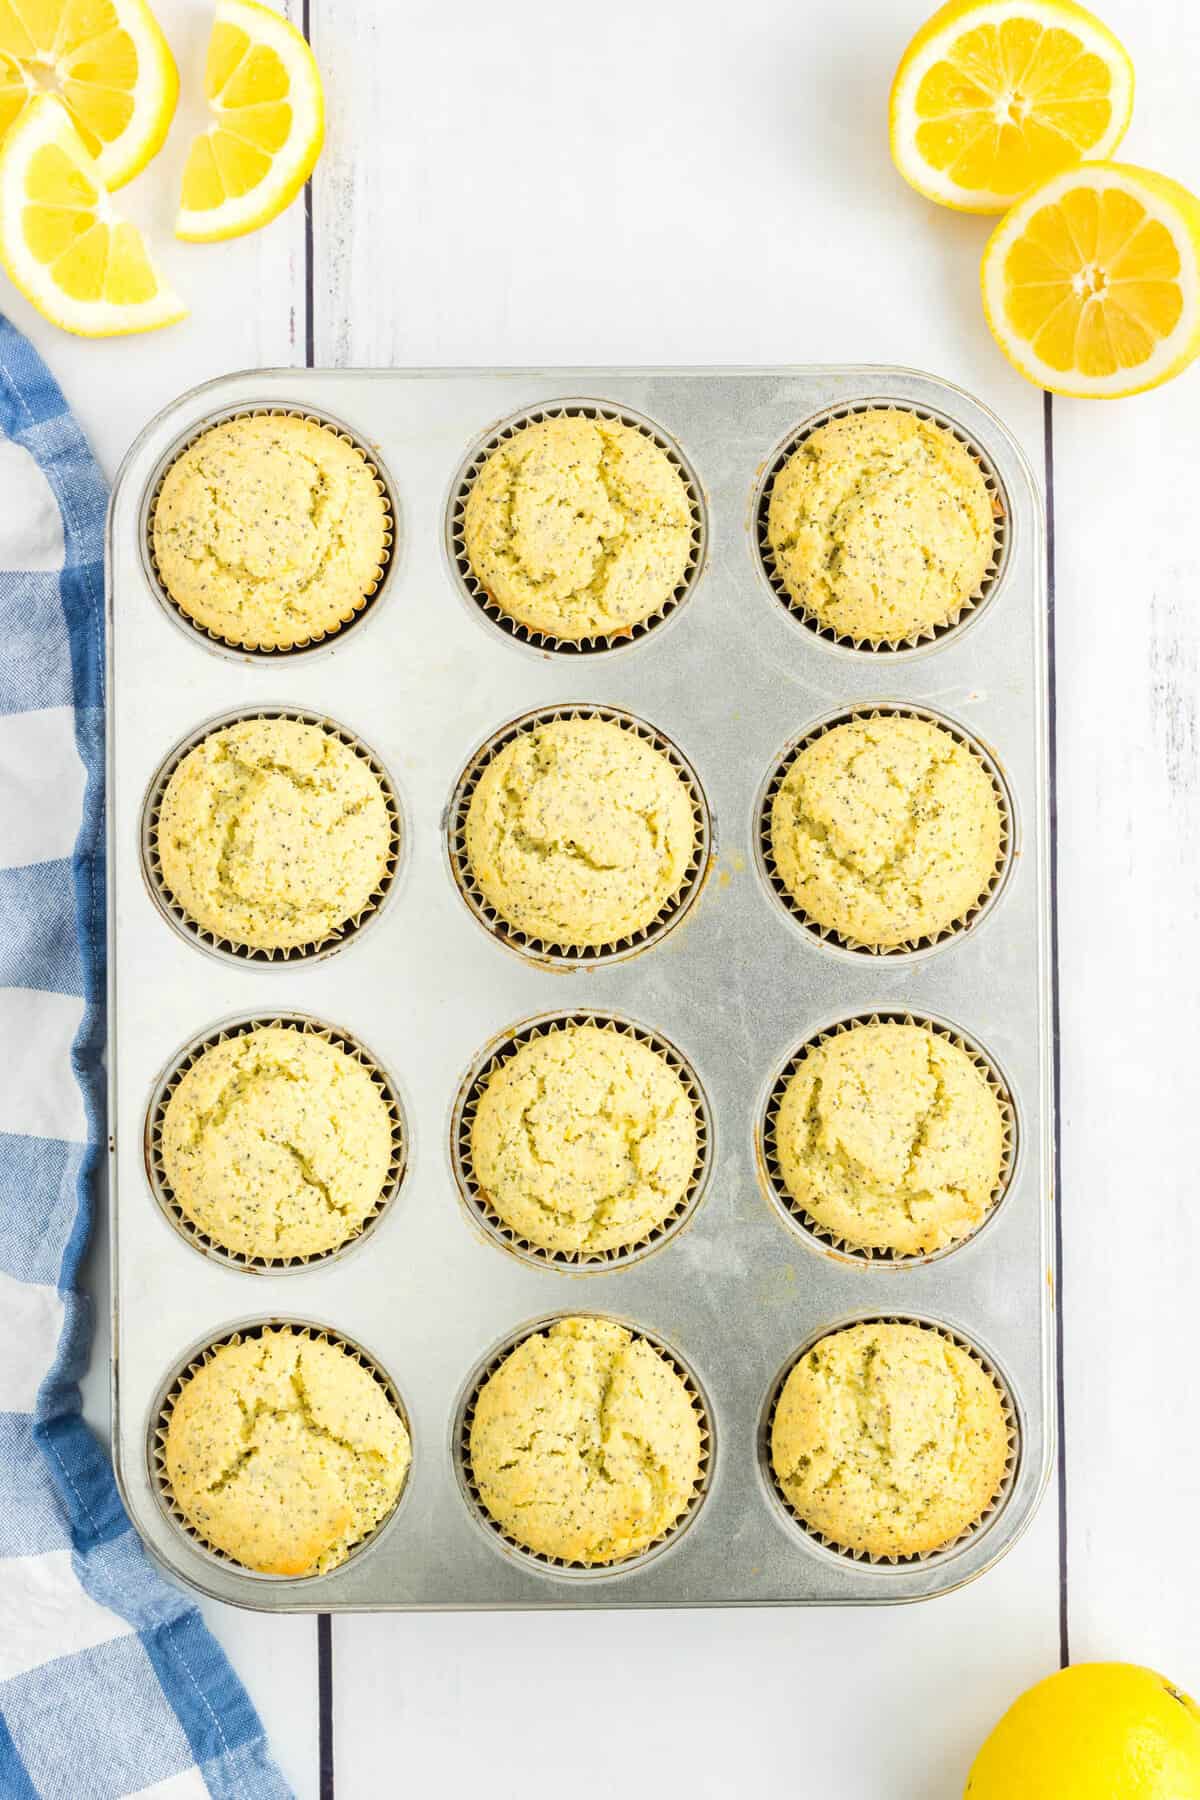 Lemon Poppy Seed Muffins Fresh Out of the Oven in Muffin Tins